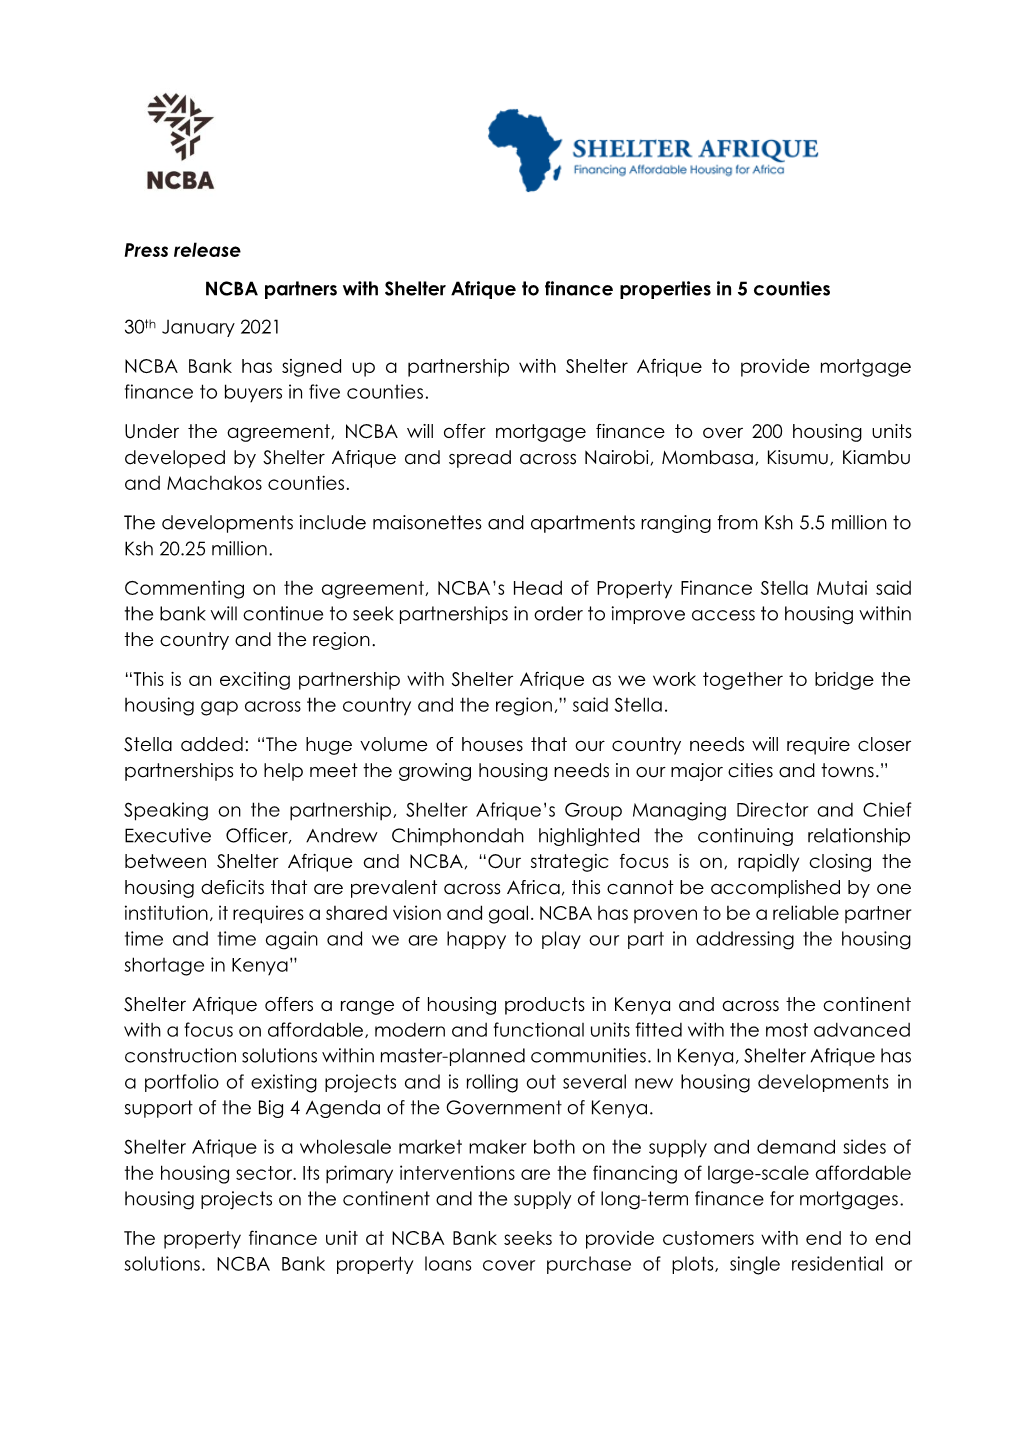 Press Release NCBA Partners with Shelter Afrique to Finance Properties